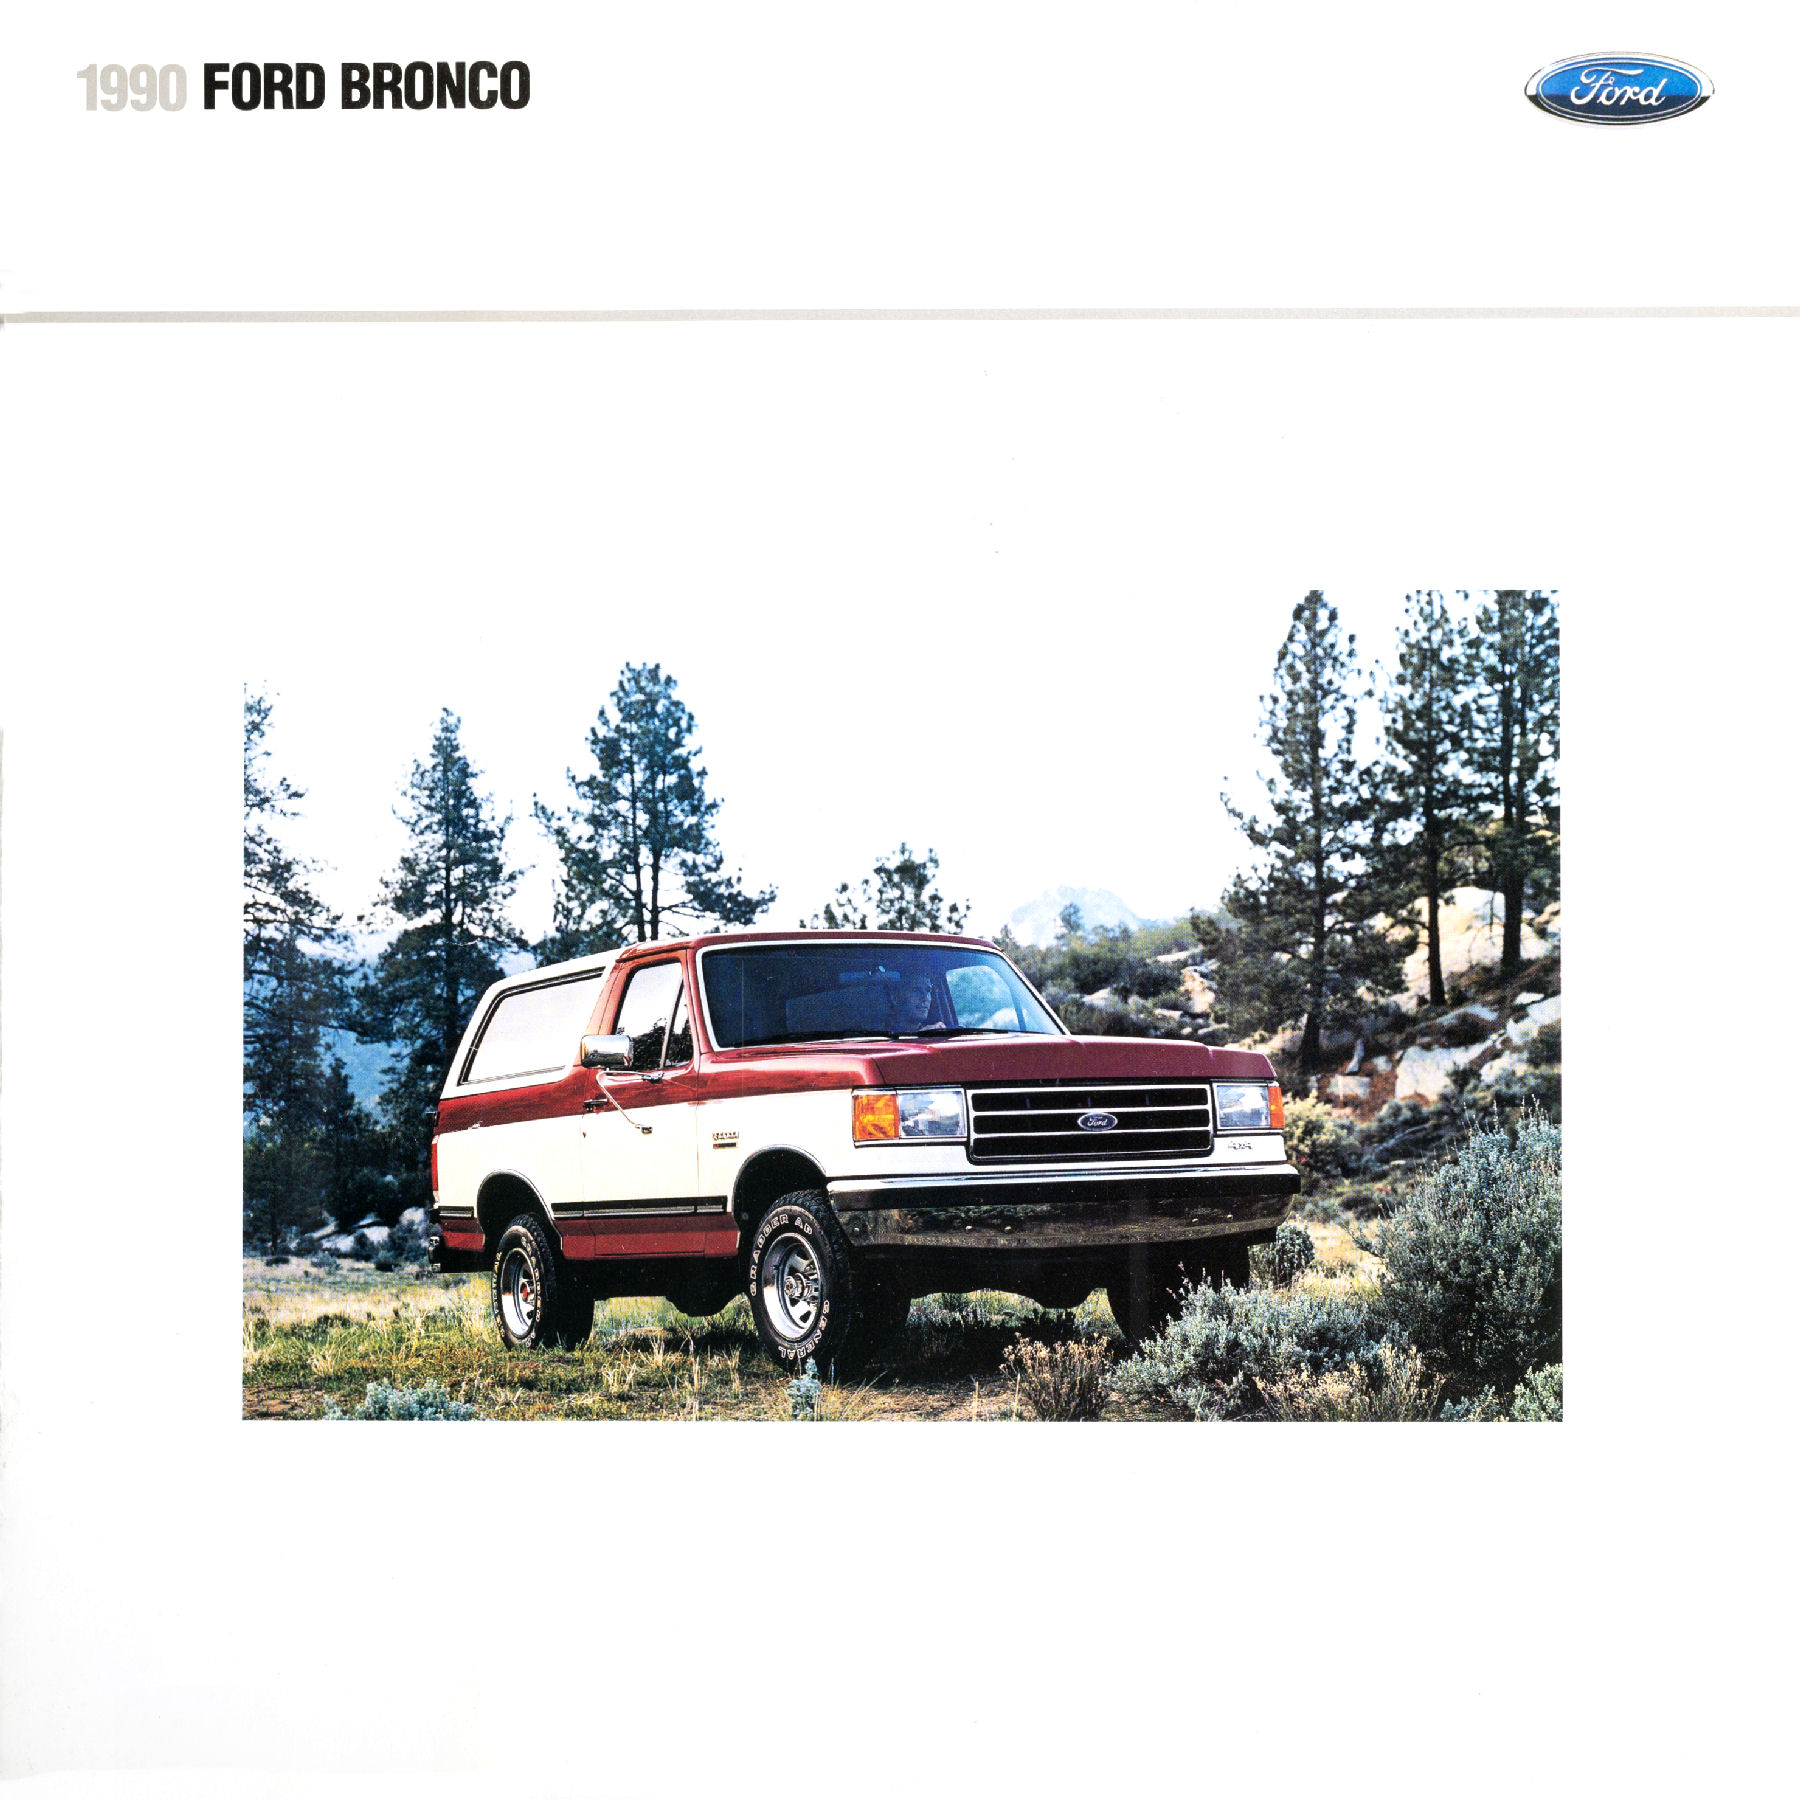 1990 Ford Bronco-01